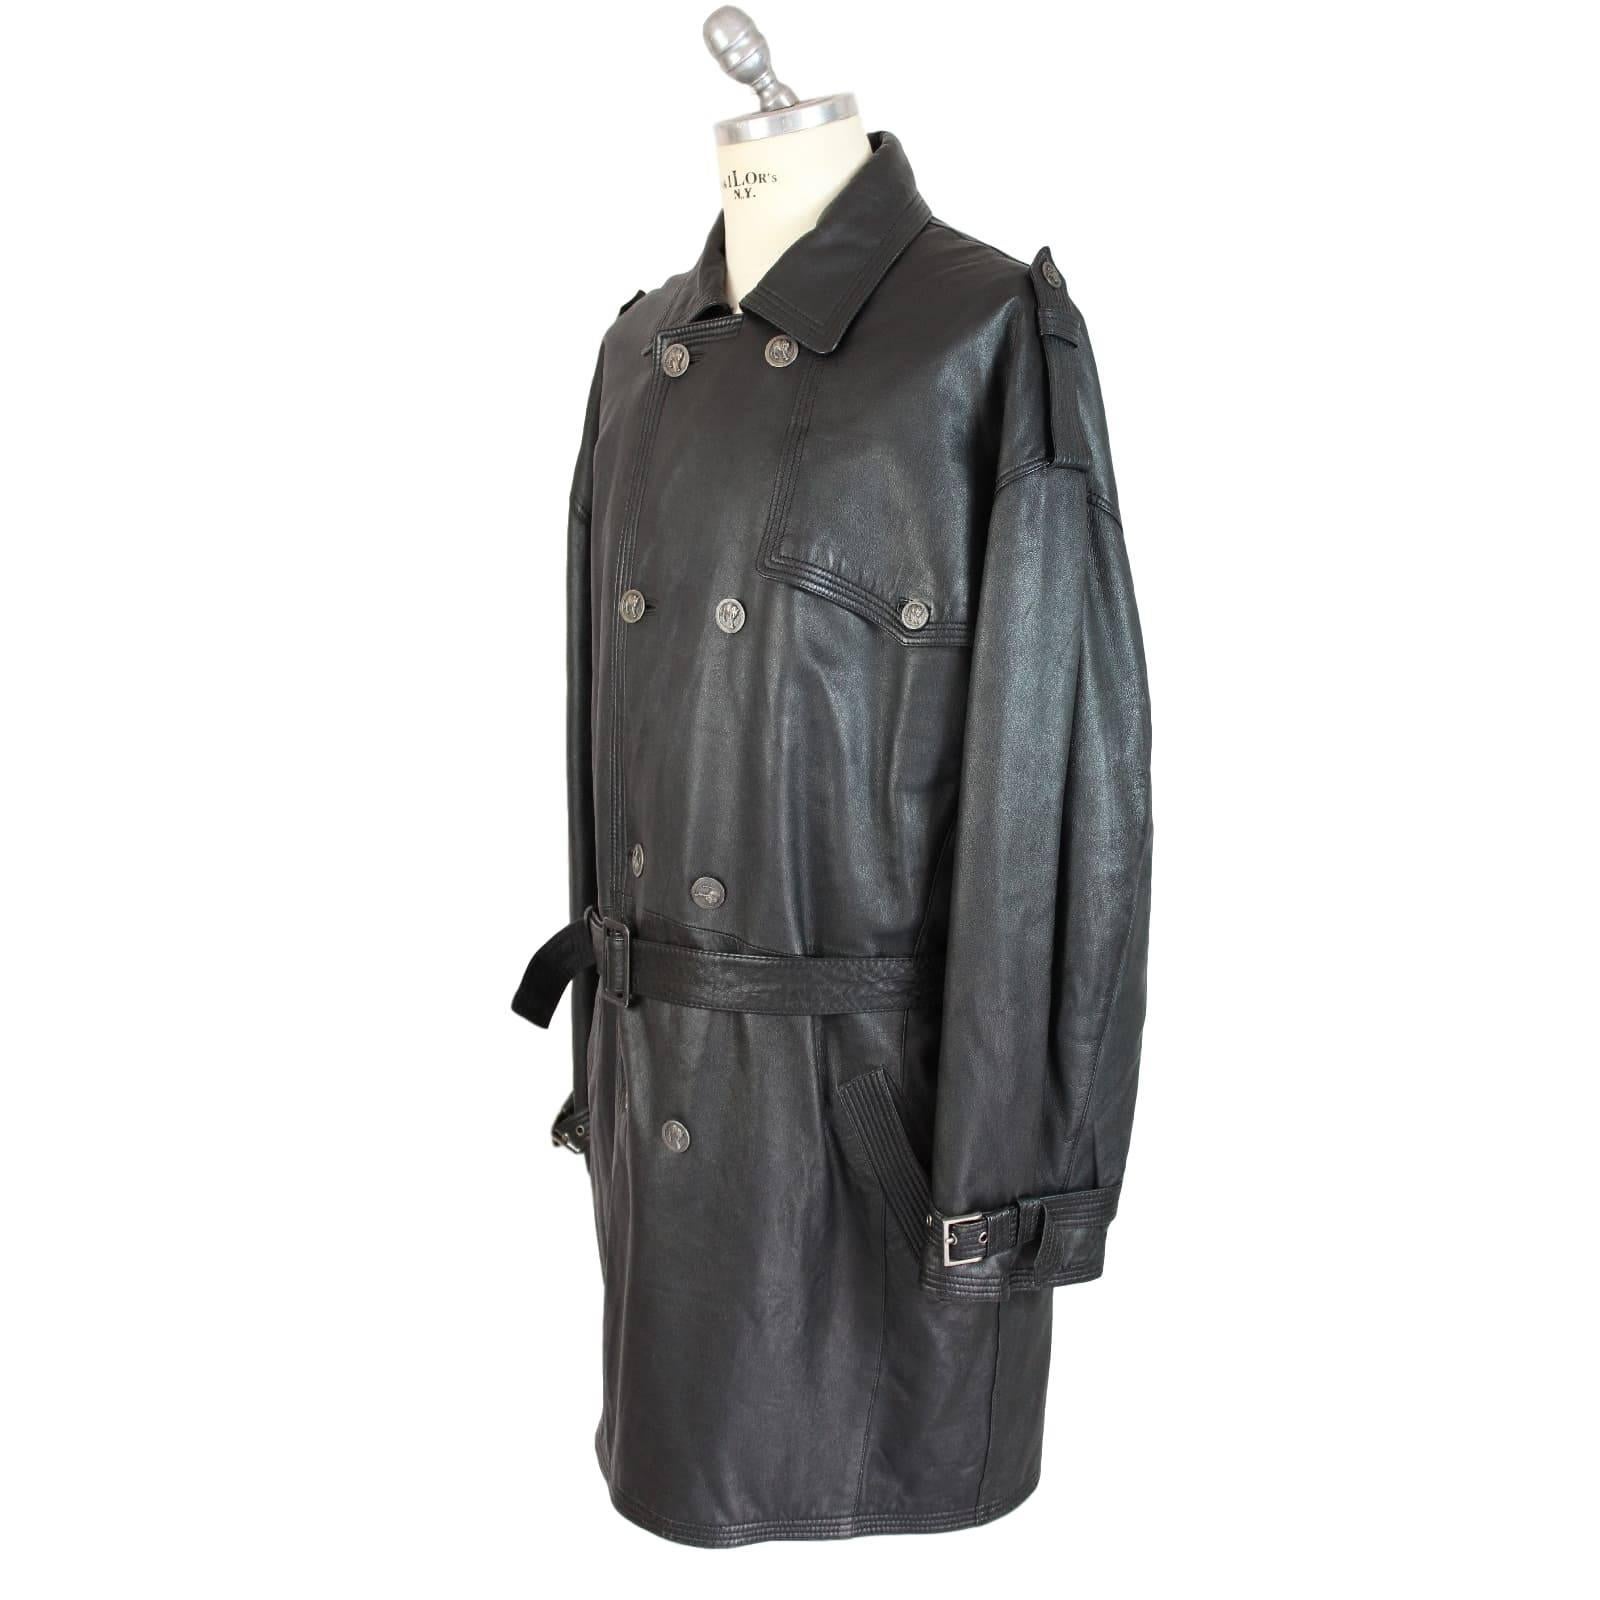 Versus by Gianni Versace trench 100% black leather, the jacket is double-breasted with belt and gray buttons on which a leopard is depicted, on the cuffs and shoulder there are belts, excellent workmanship and soft leather excellent vintage